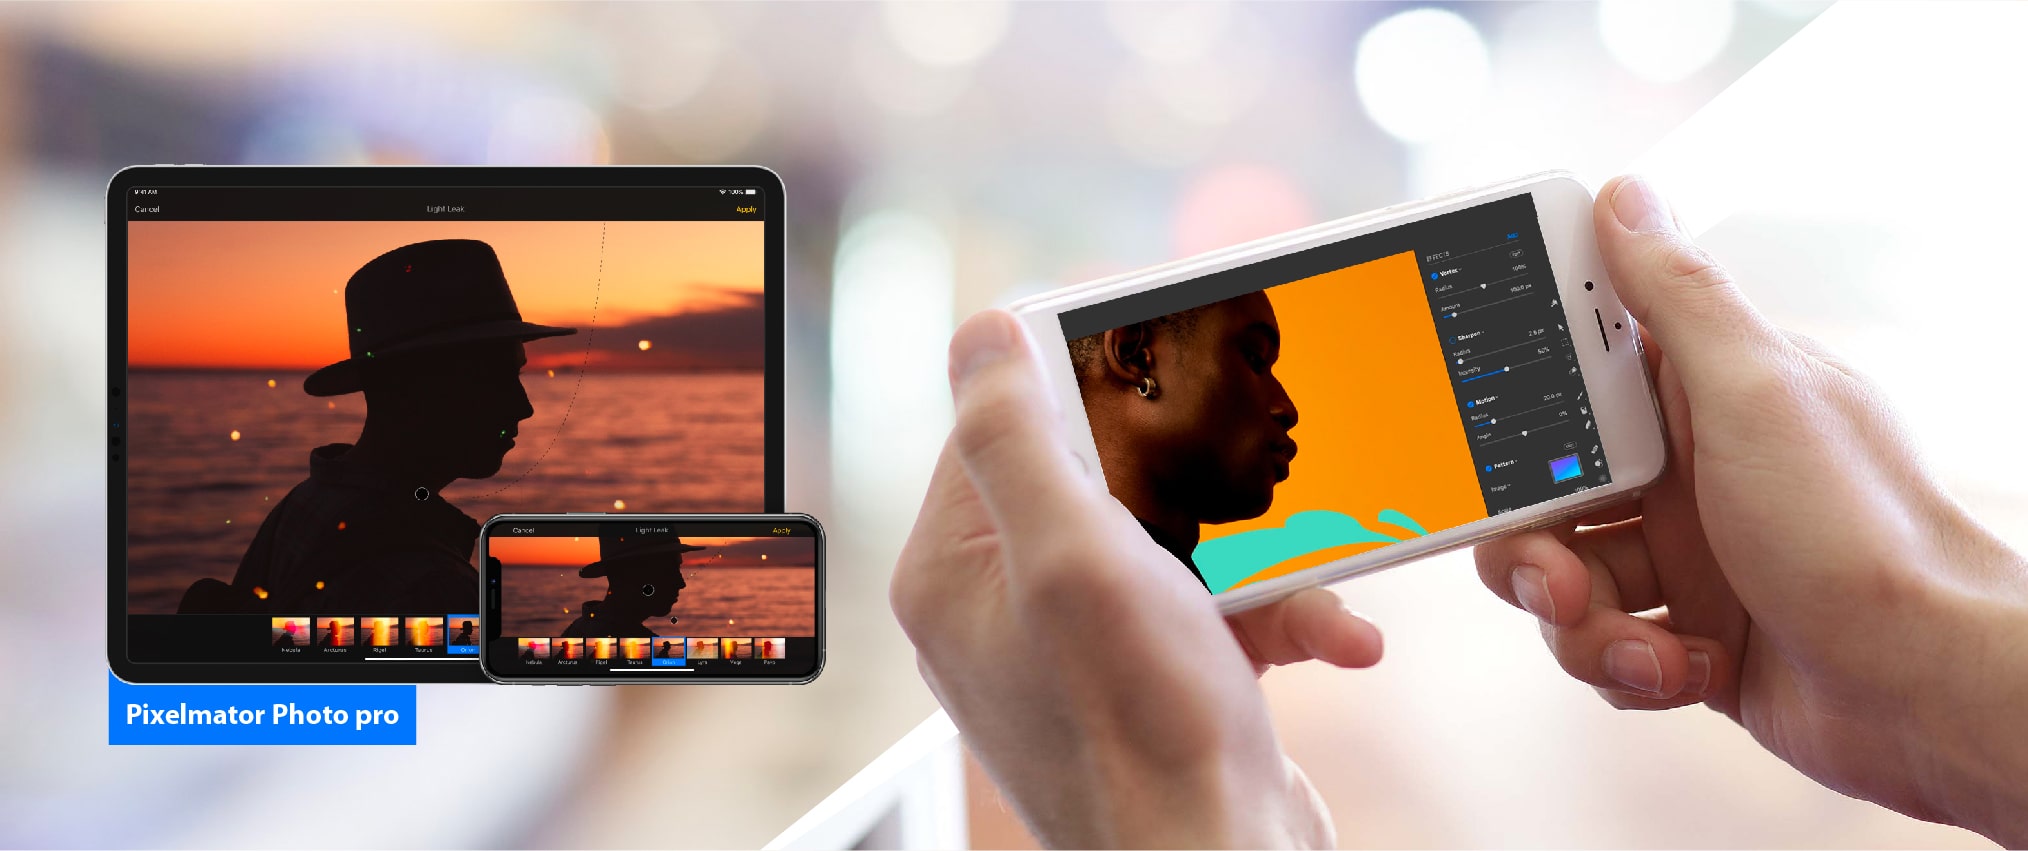 Pixelmator Photo's pro image editing app comes to the iPhone